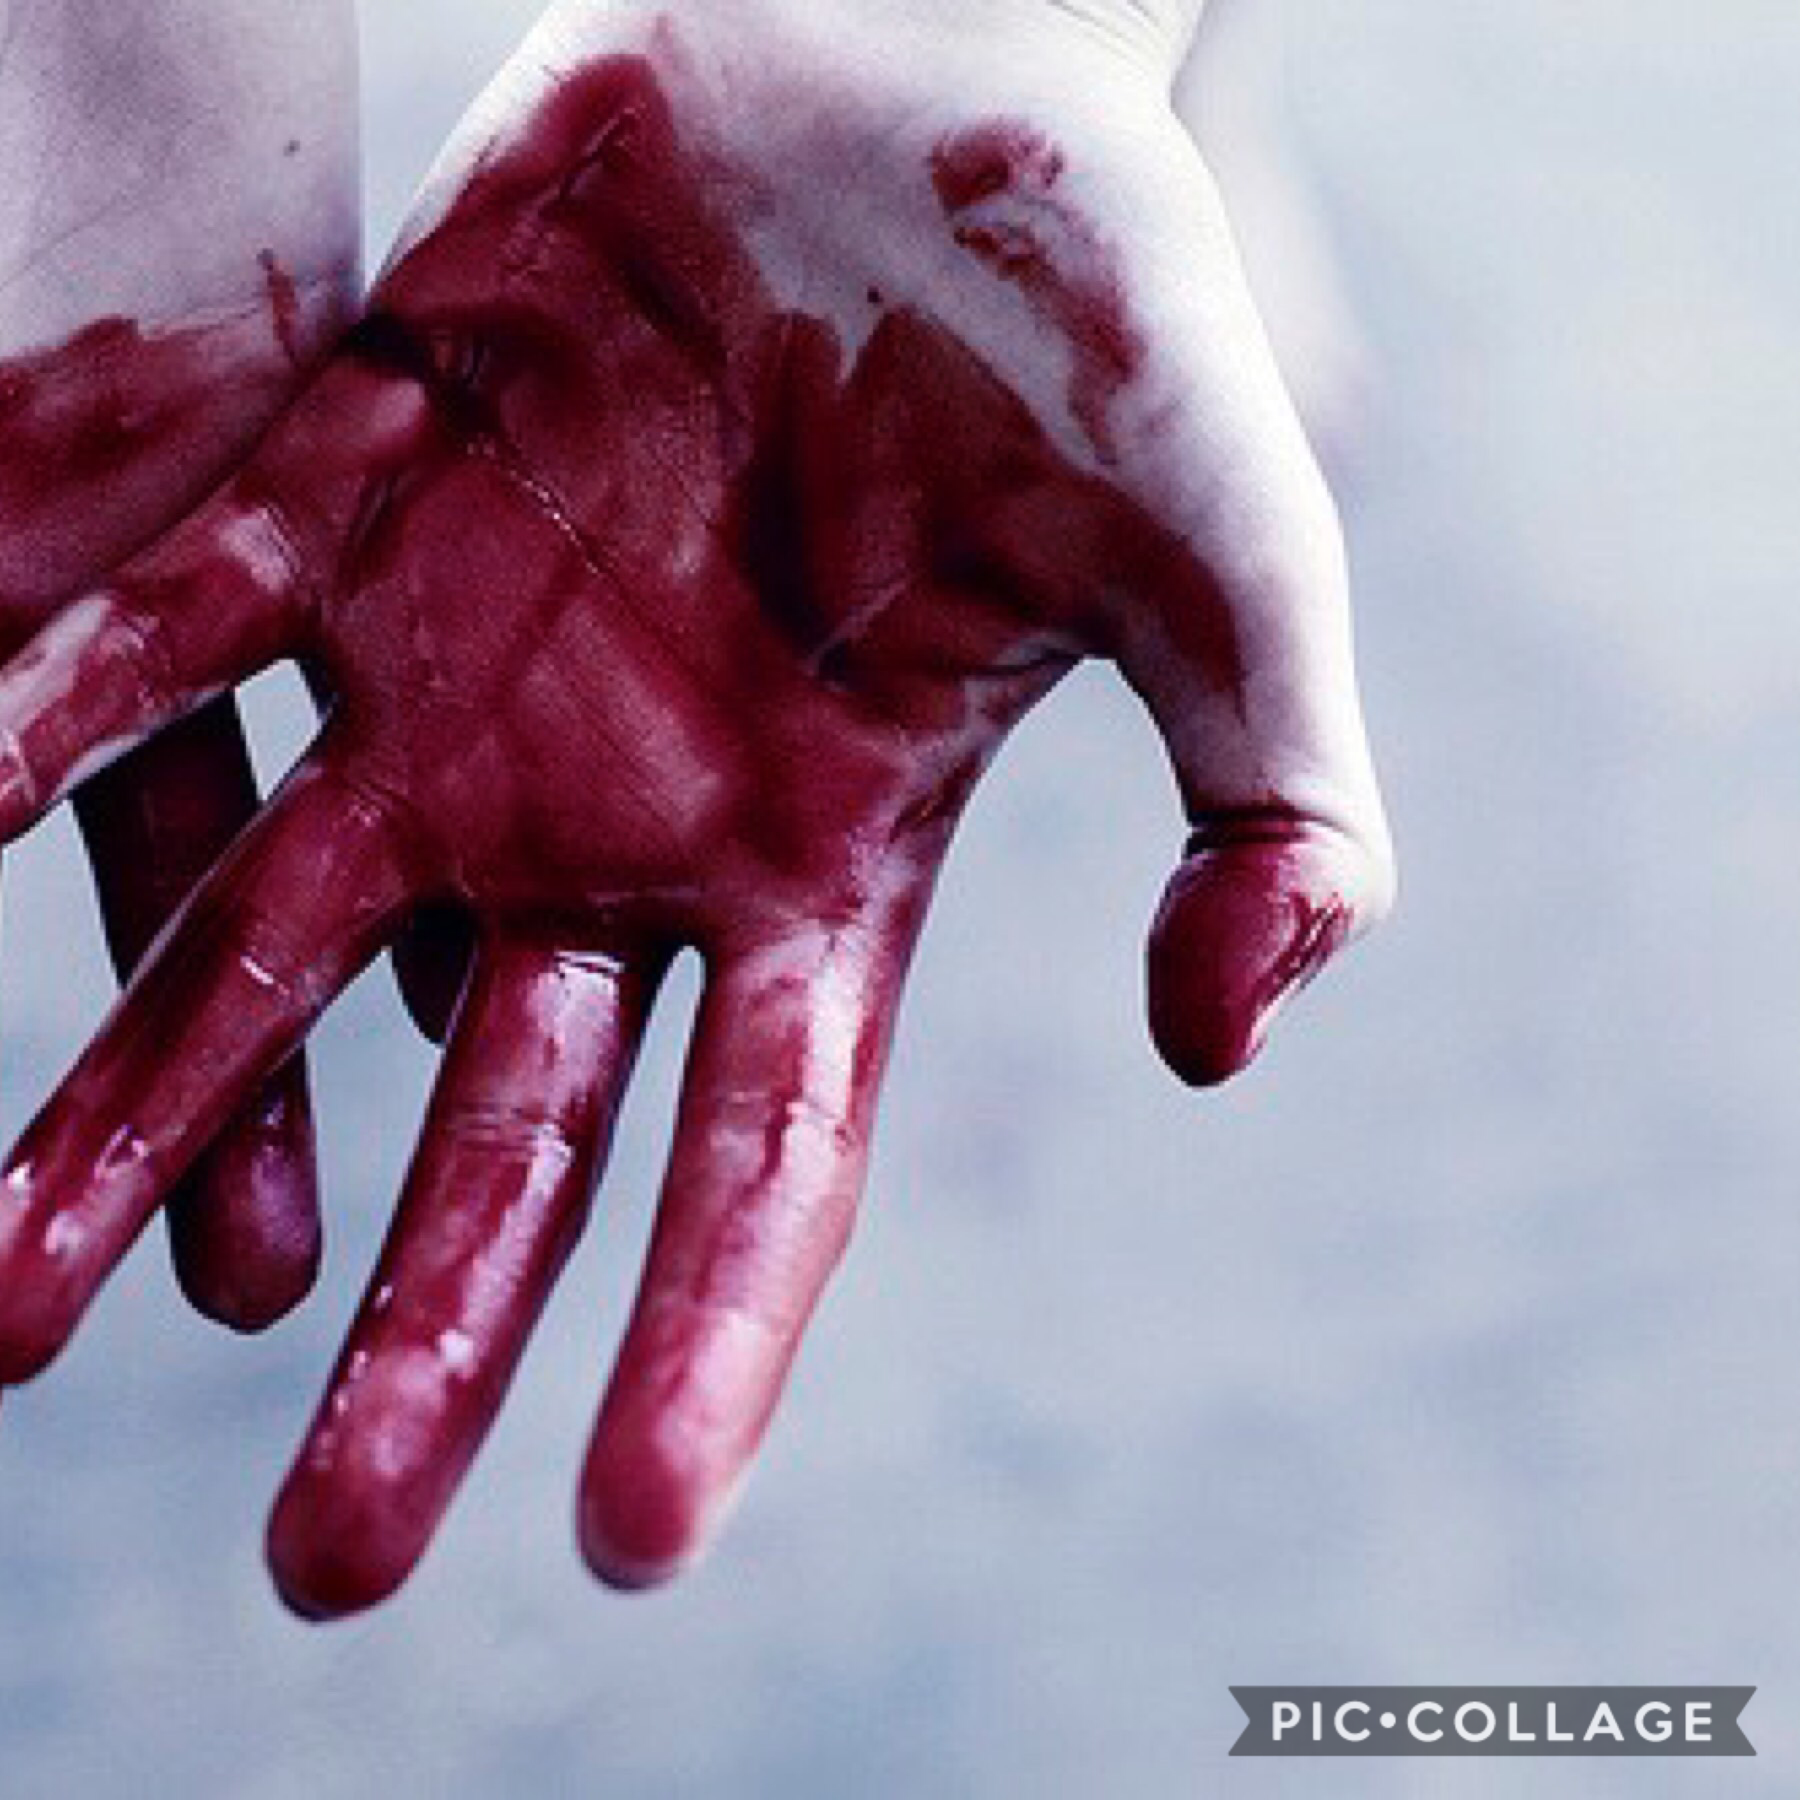 Why hello. So today is my bday so I thought I’d post blood as a beautiful tribute to me😂 (I’m very weird and have a dark sense of humor)😂